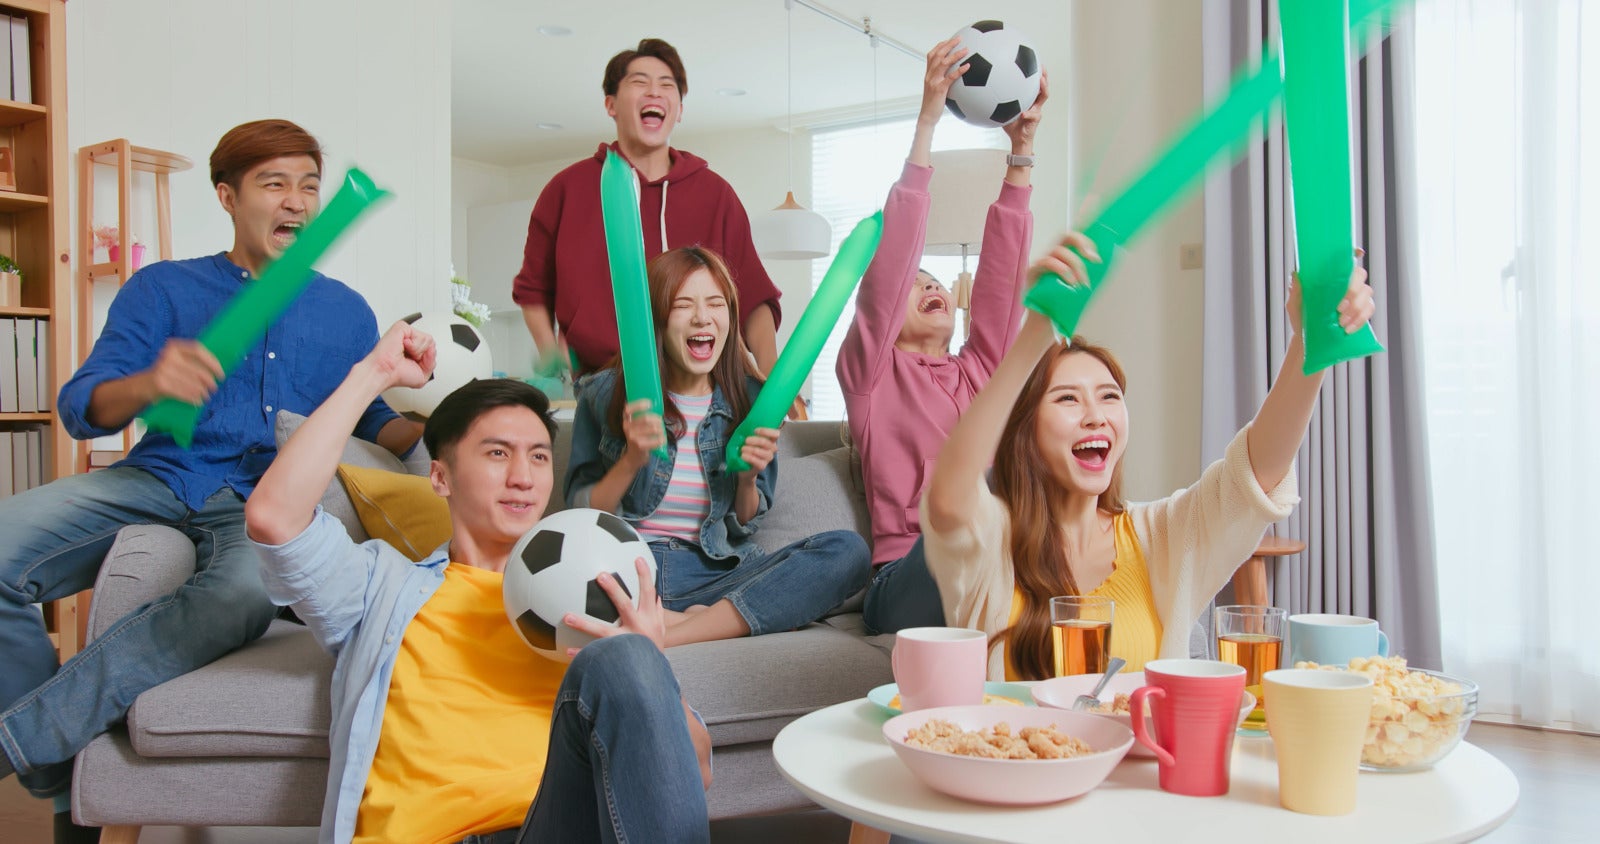 https www.123rf.com photo 185686037 happy asian friends cheer watching live streaming soccer game while scoring goals they wave green th.html